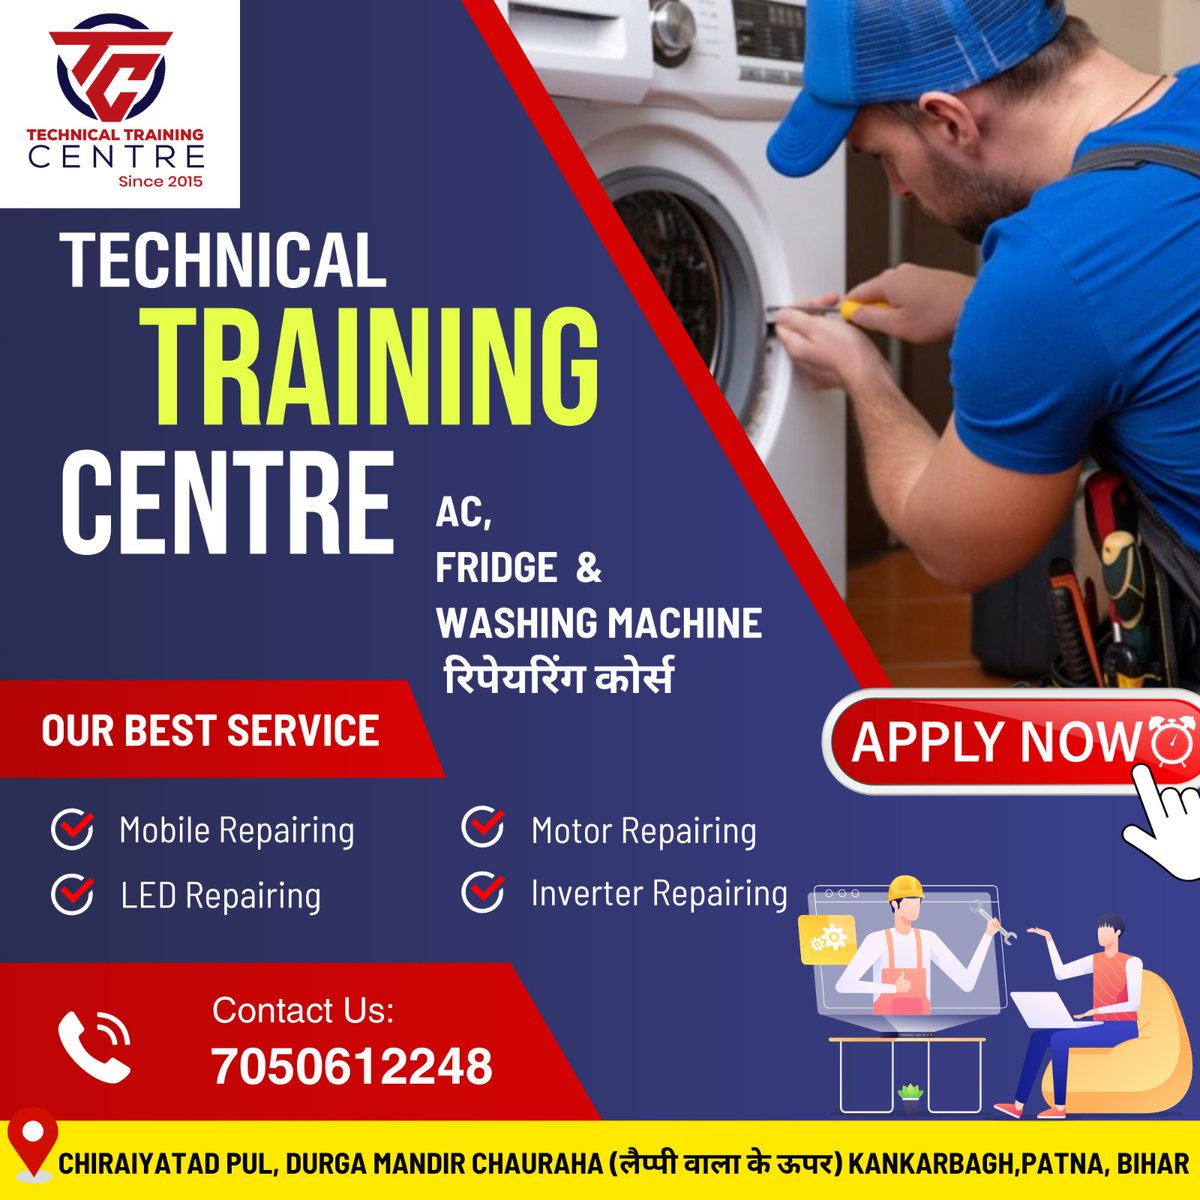 Technical Training Centre

Gain hands-on experience and technical expertise in repairing and maintaining RO systems and submersible equipment💪 

#ROrepair #itiexperts #technician #technicalknowledge #technicaltraining #traininginstitute #trainingcentre